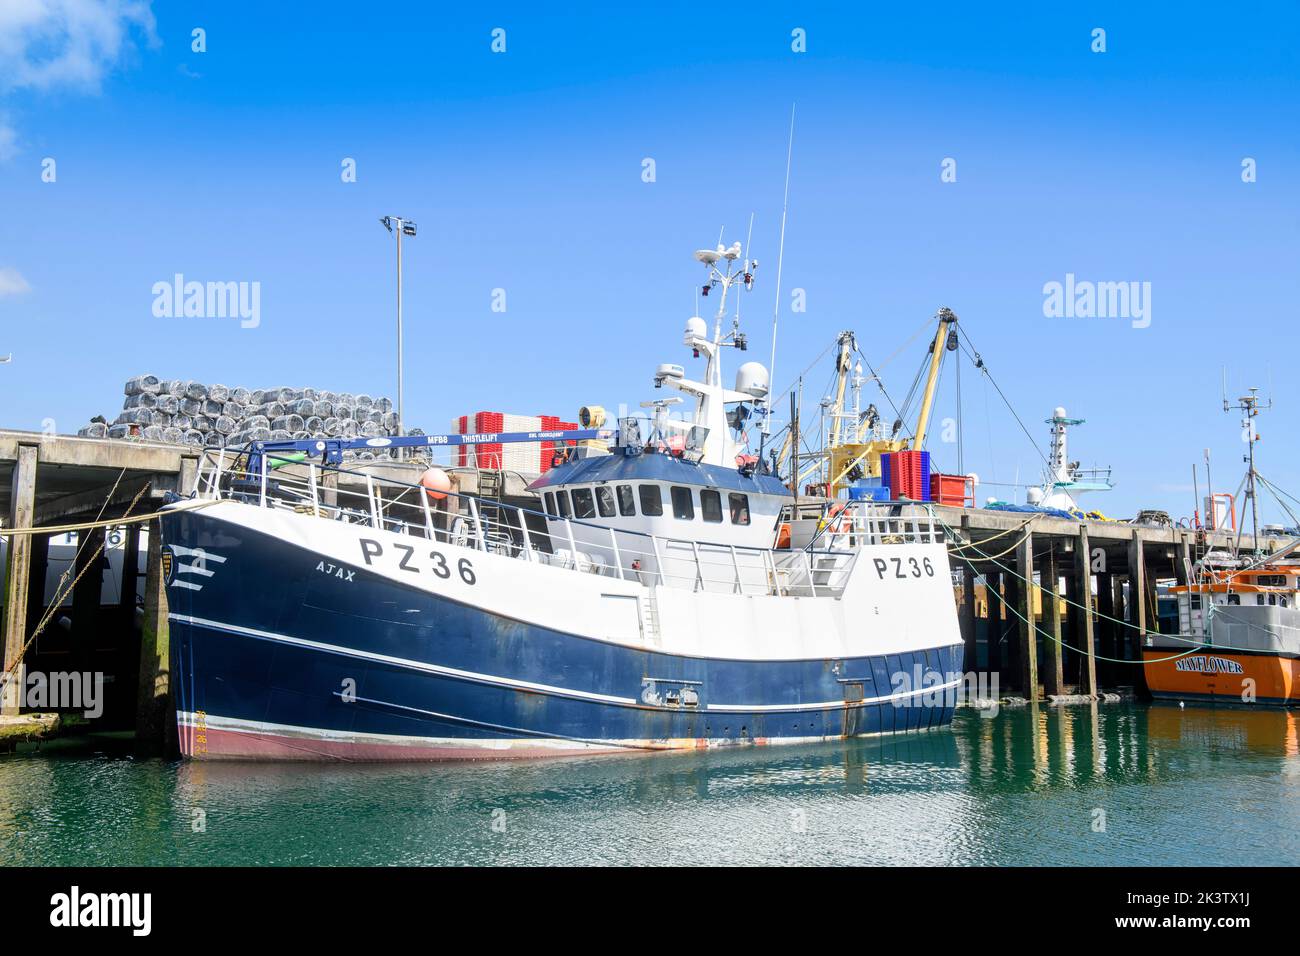 A trawler moored at Newlyn harbour in Cornwall, UK Stock Photo